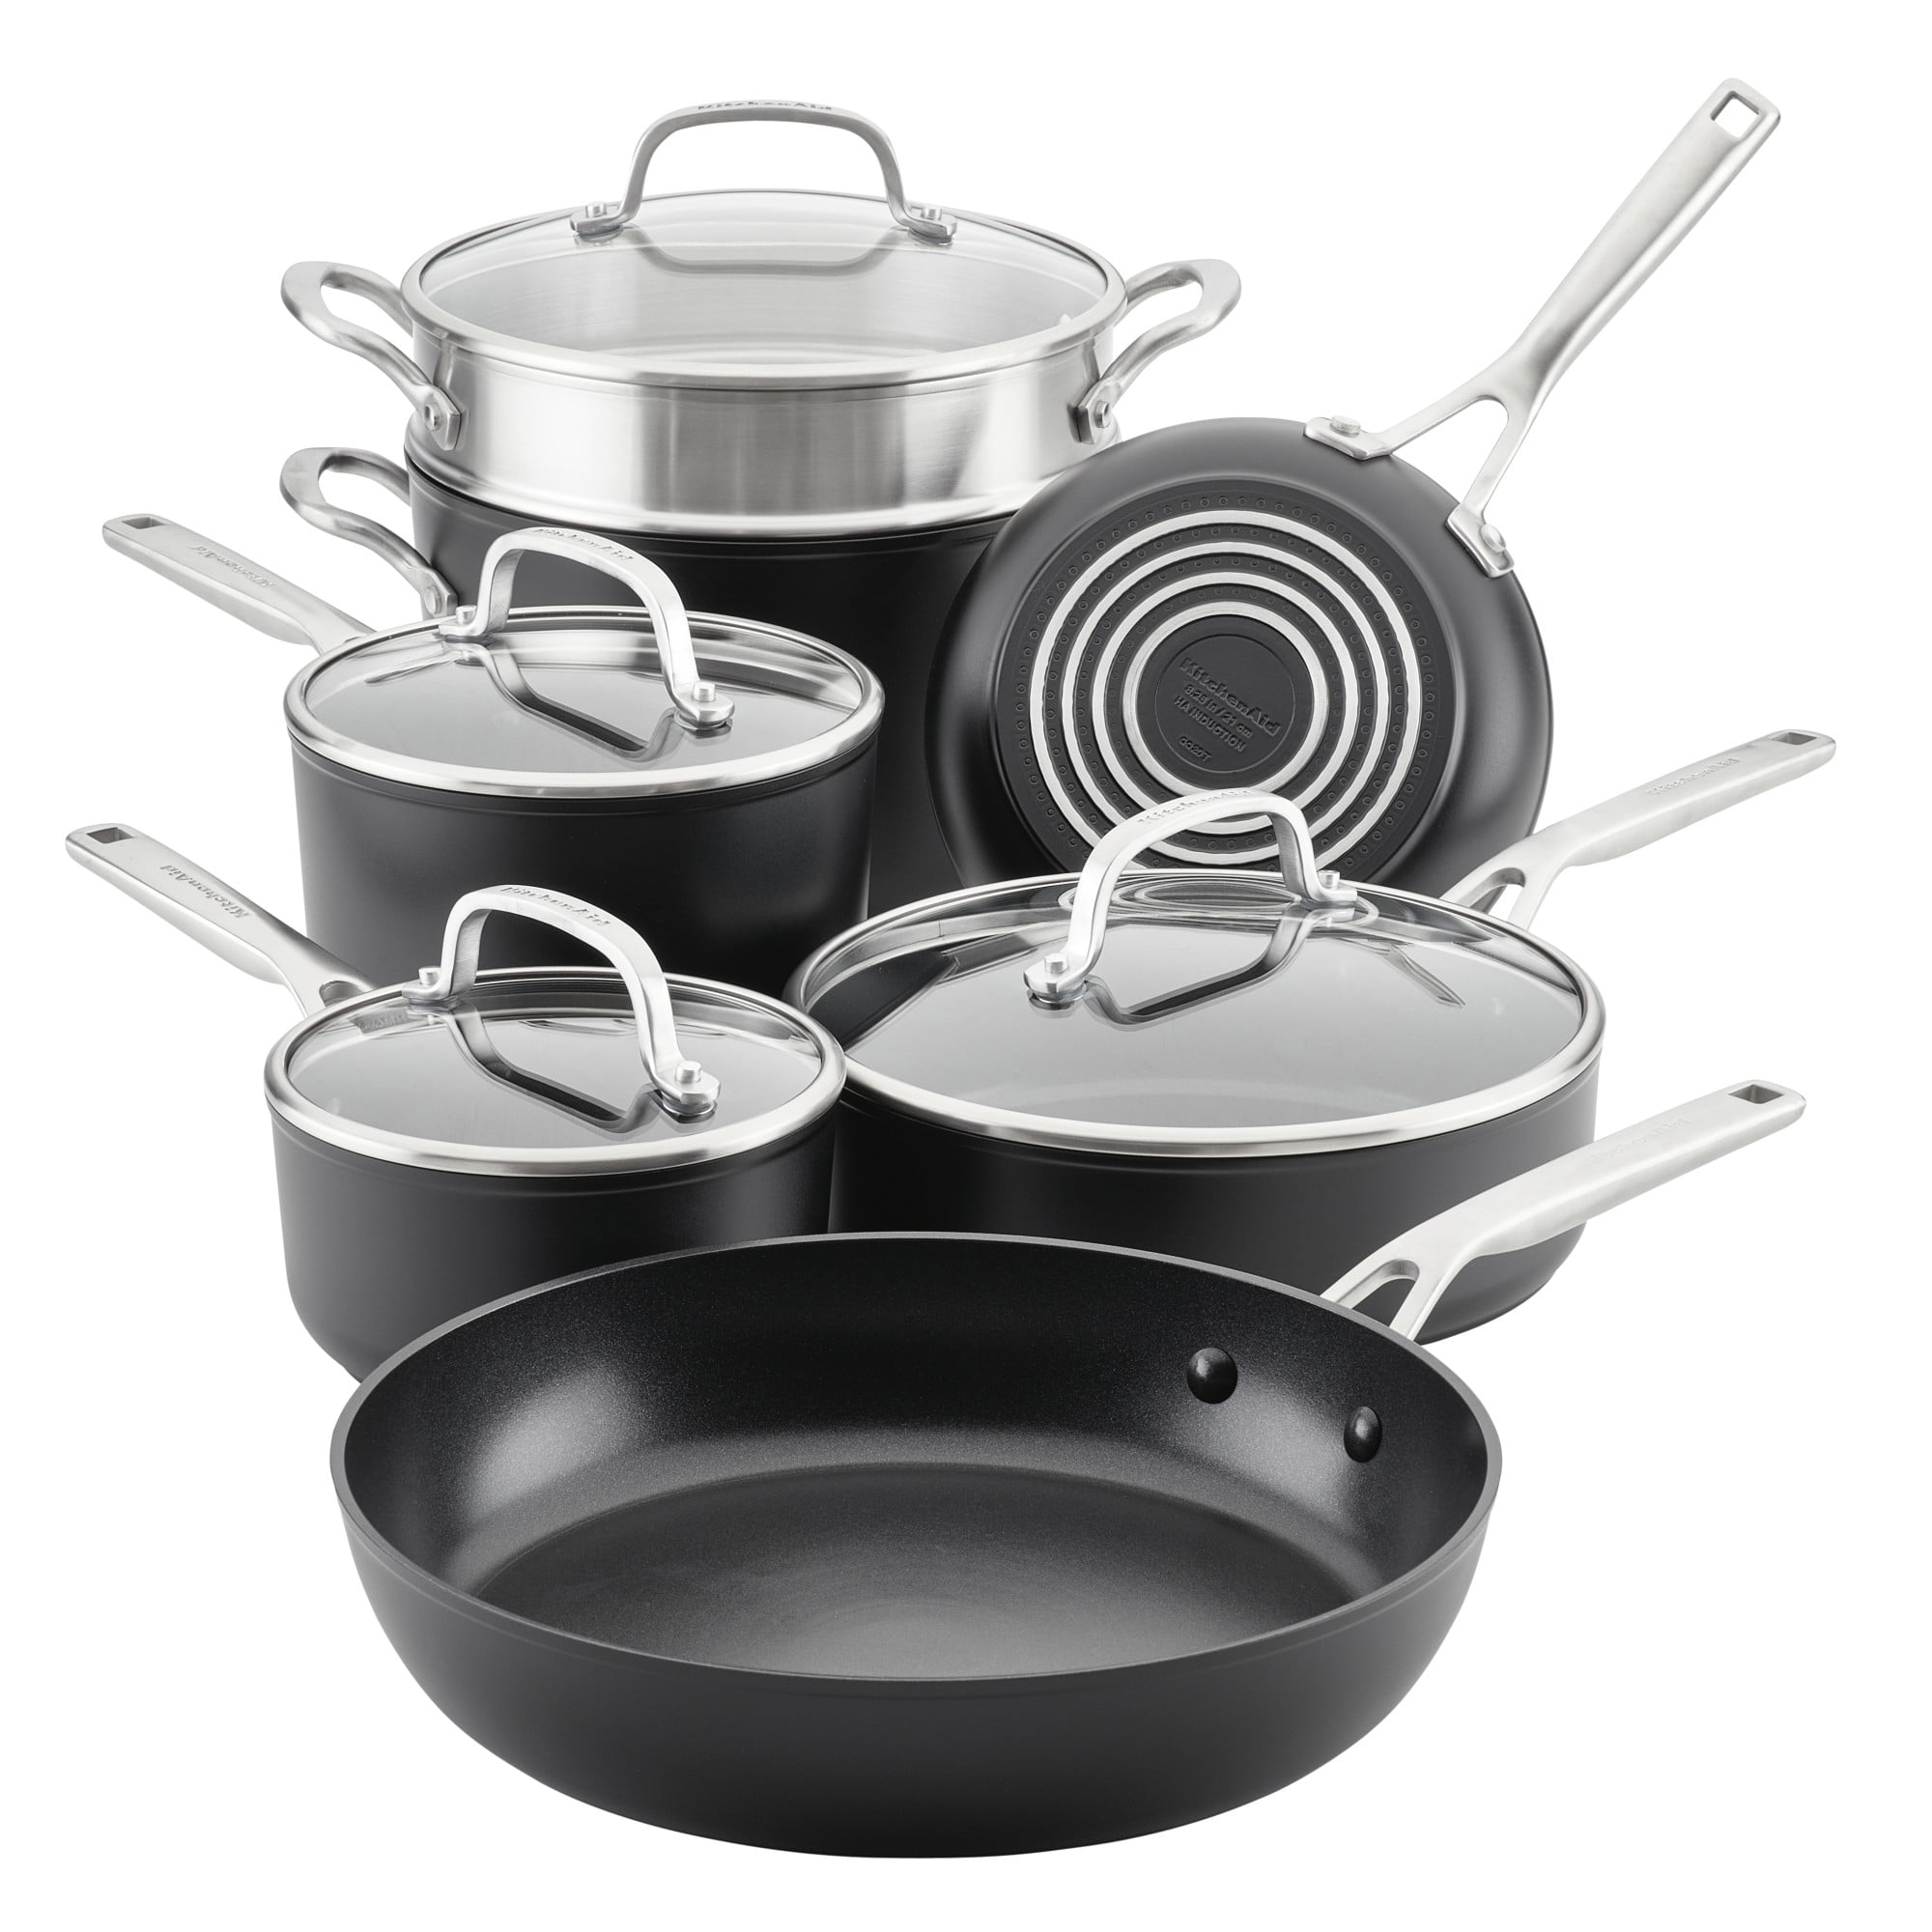 Select by Calphalon Hard-anodized Nonstick 10-piece Cookware Set for sale online 